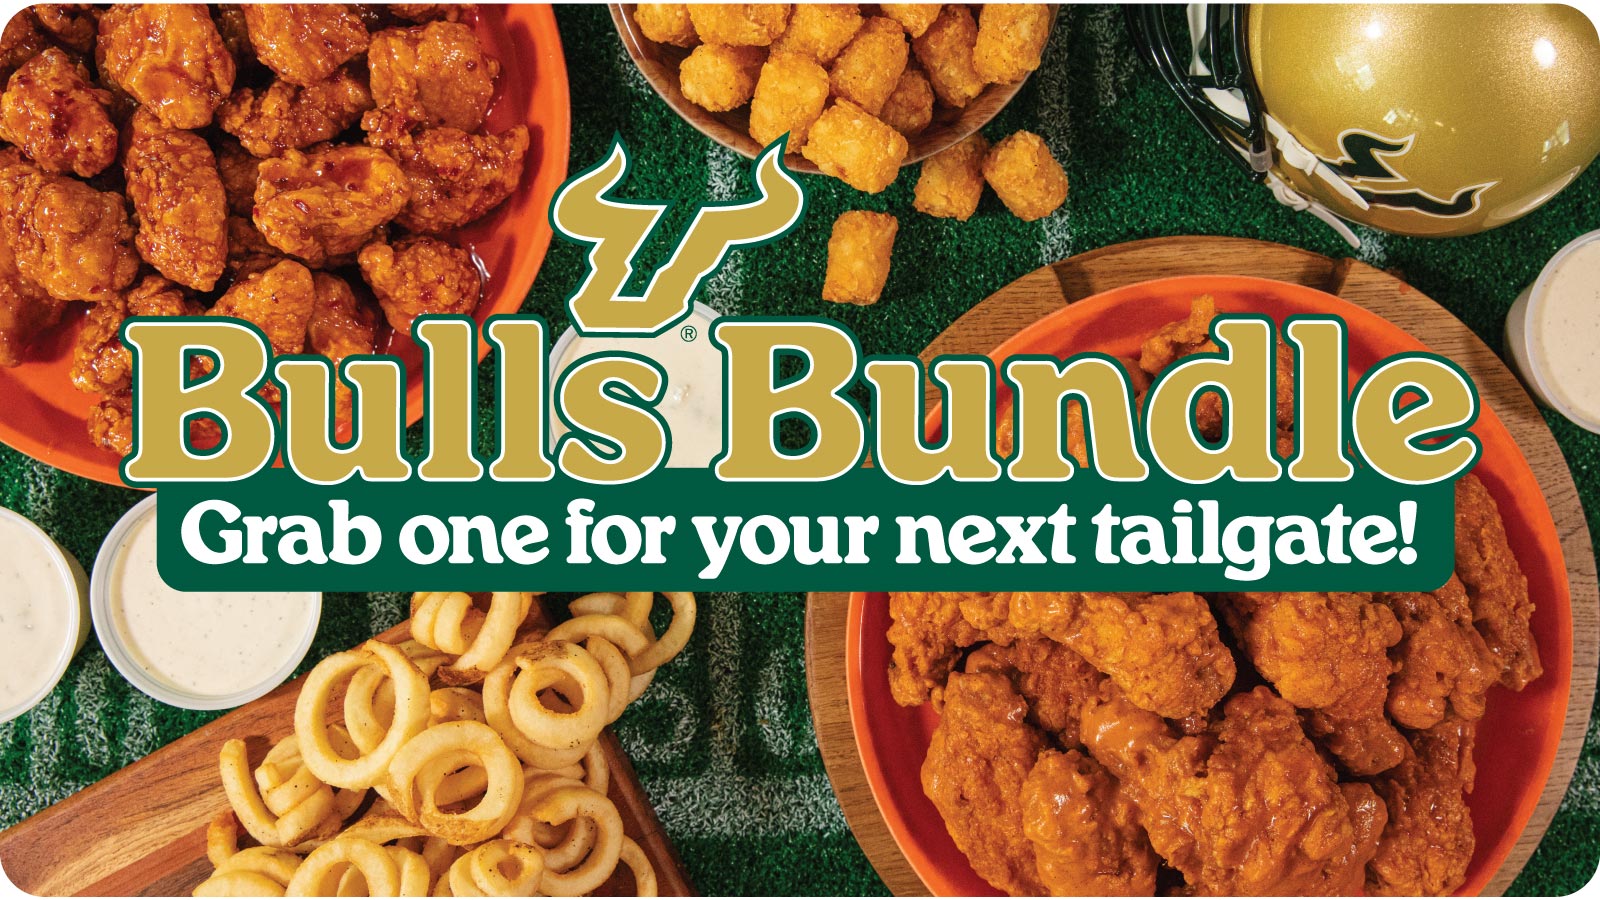 Grab a Bulls Bundle for your next tailgate!